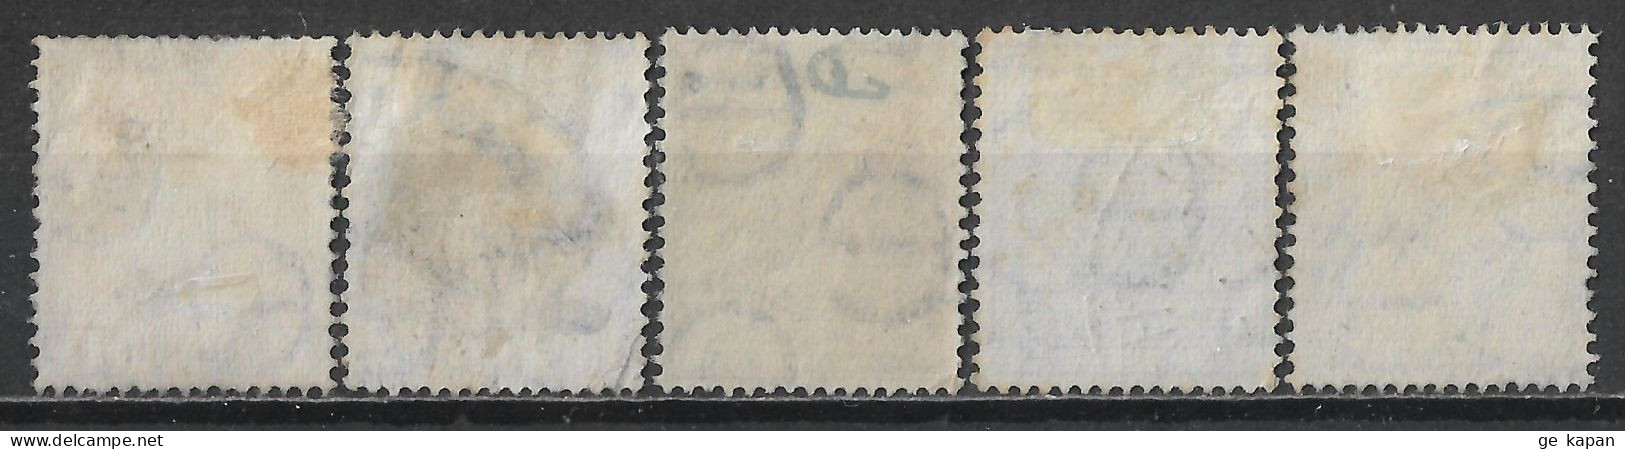 1940-1941 IRELAND SET OF 5 USED STAMPS (Michel # 72A,74A,75A,76AI,77A) CV €1.80 - Usati